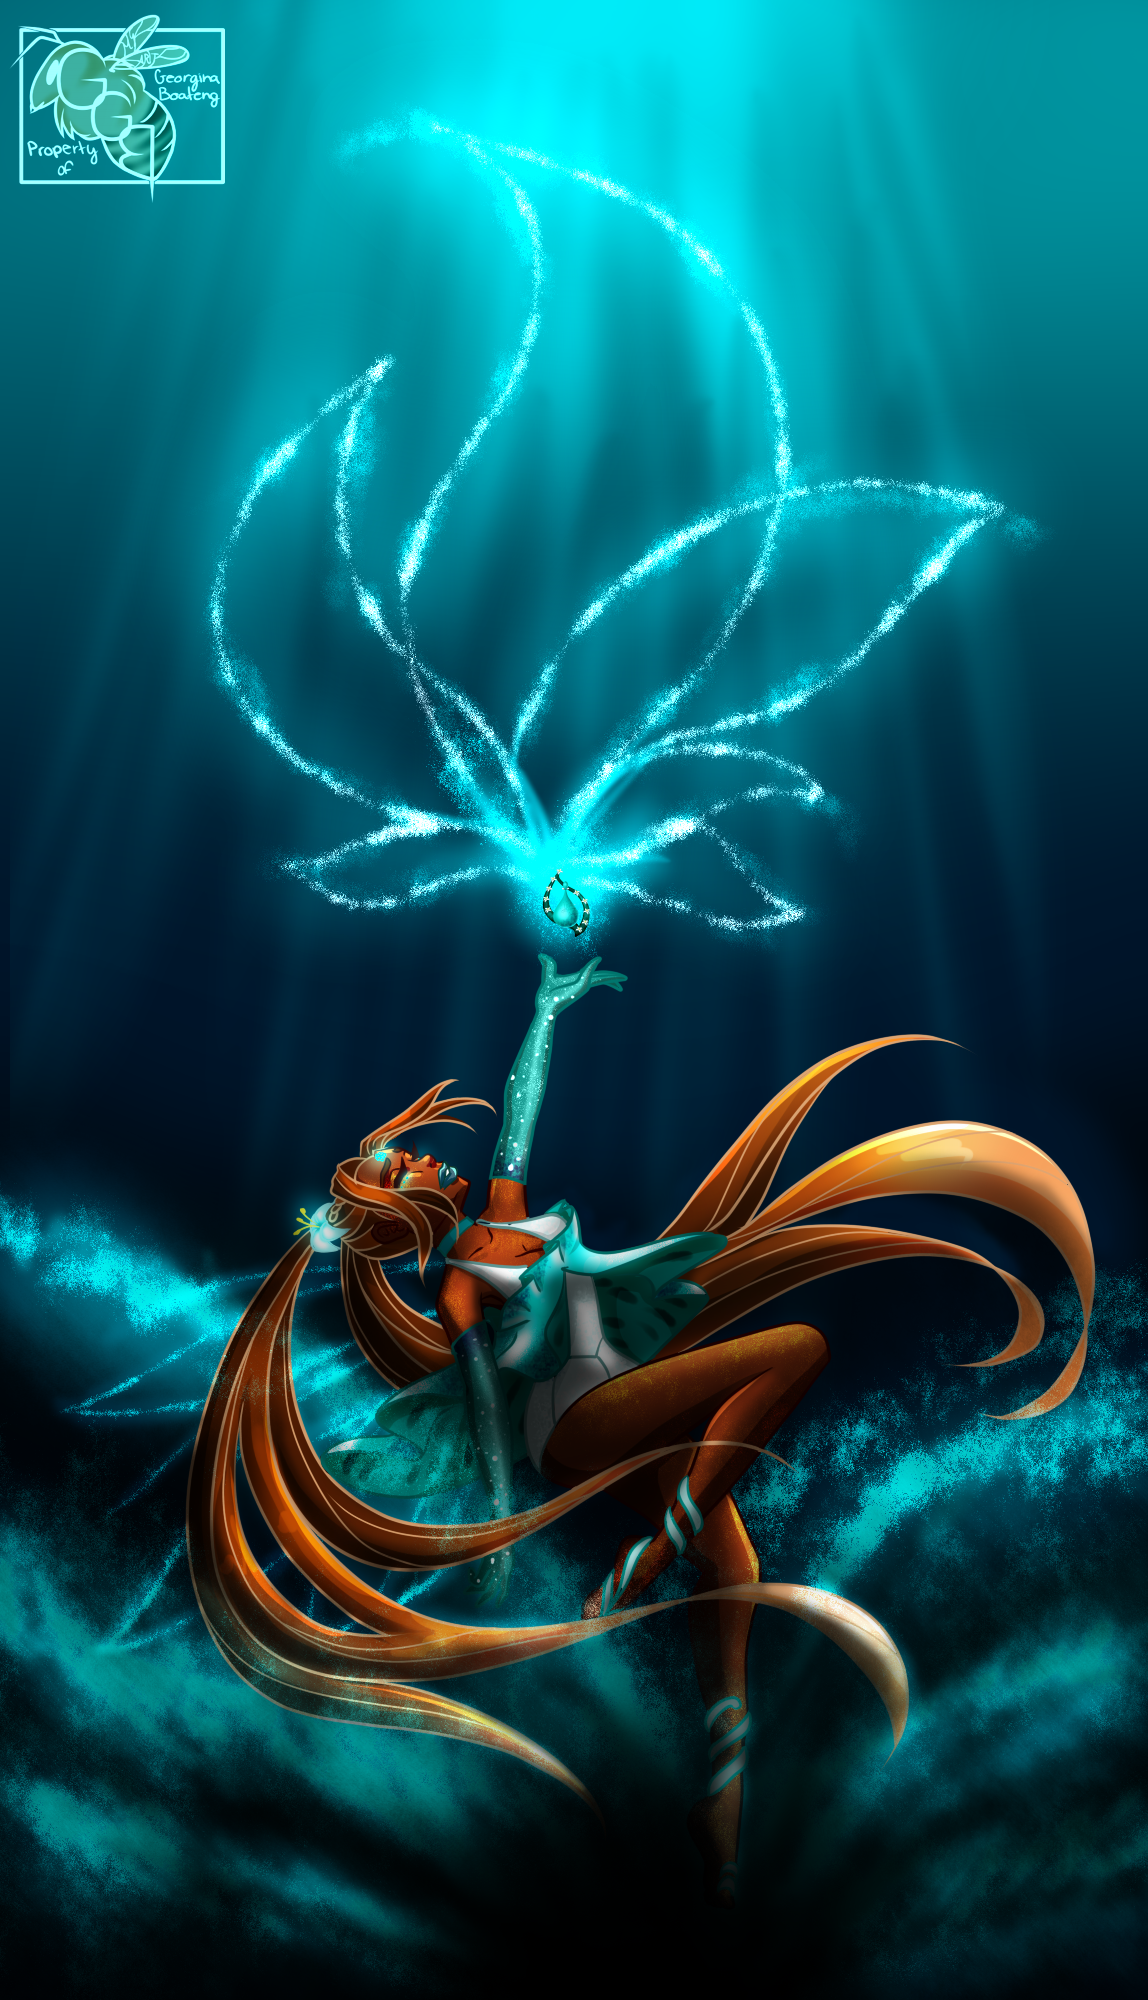 free background : fairy dust by Spin-T on DeviantArt